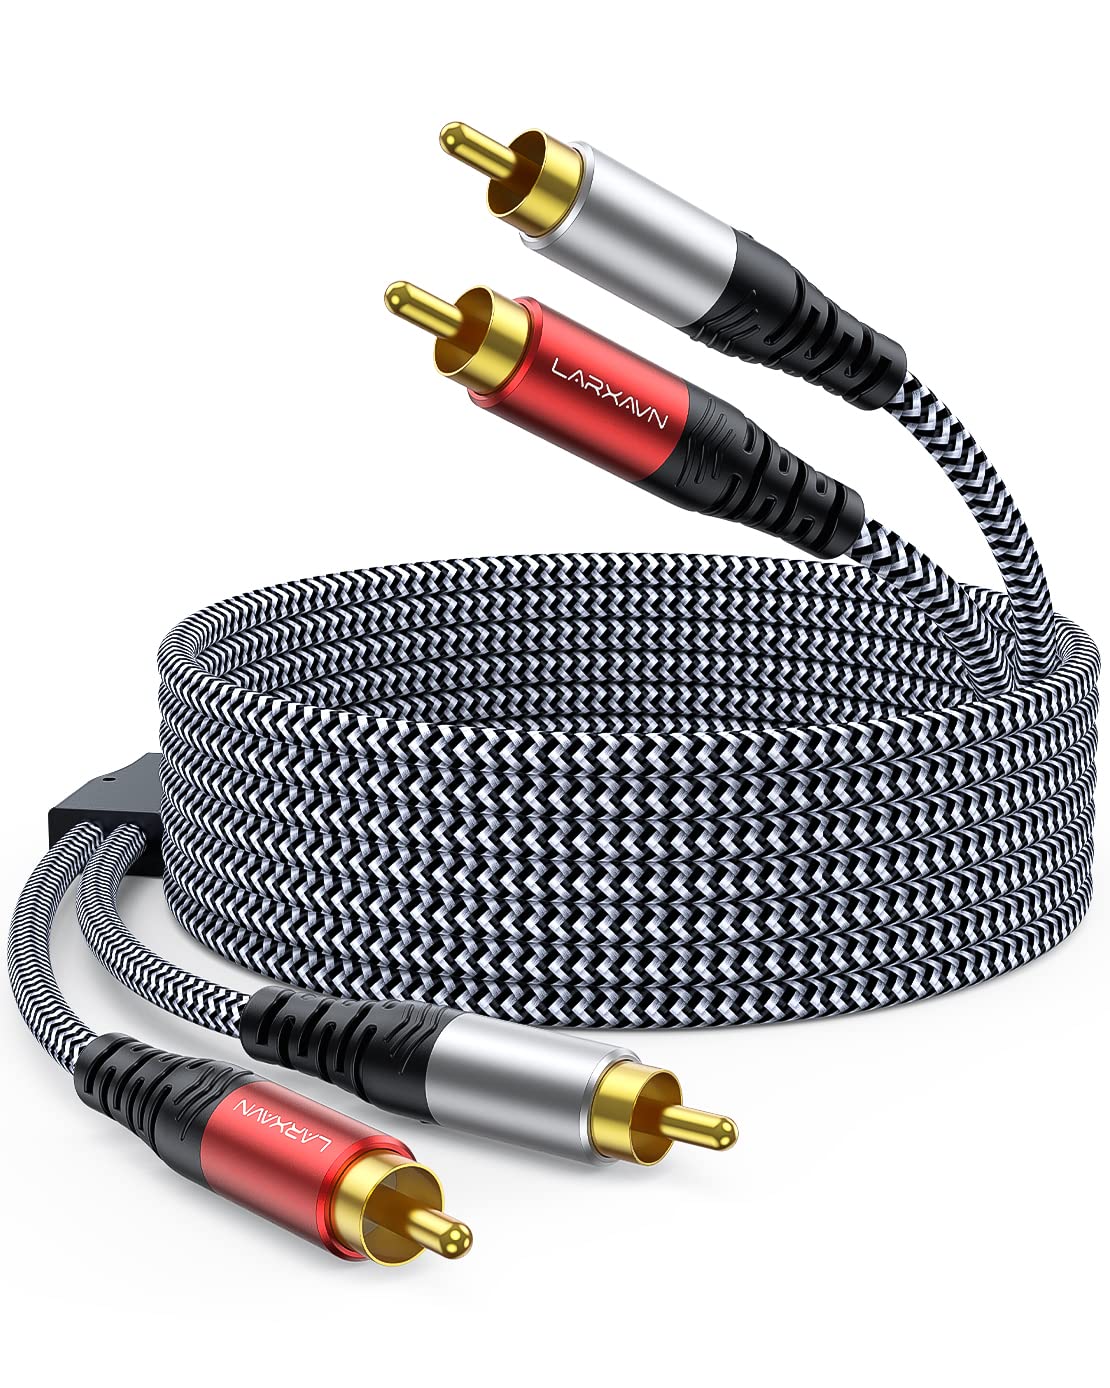 Larxavn RCA Cables, 2-Male to 2-Male RCA Audio Stereo [...]